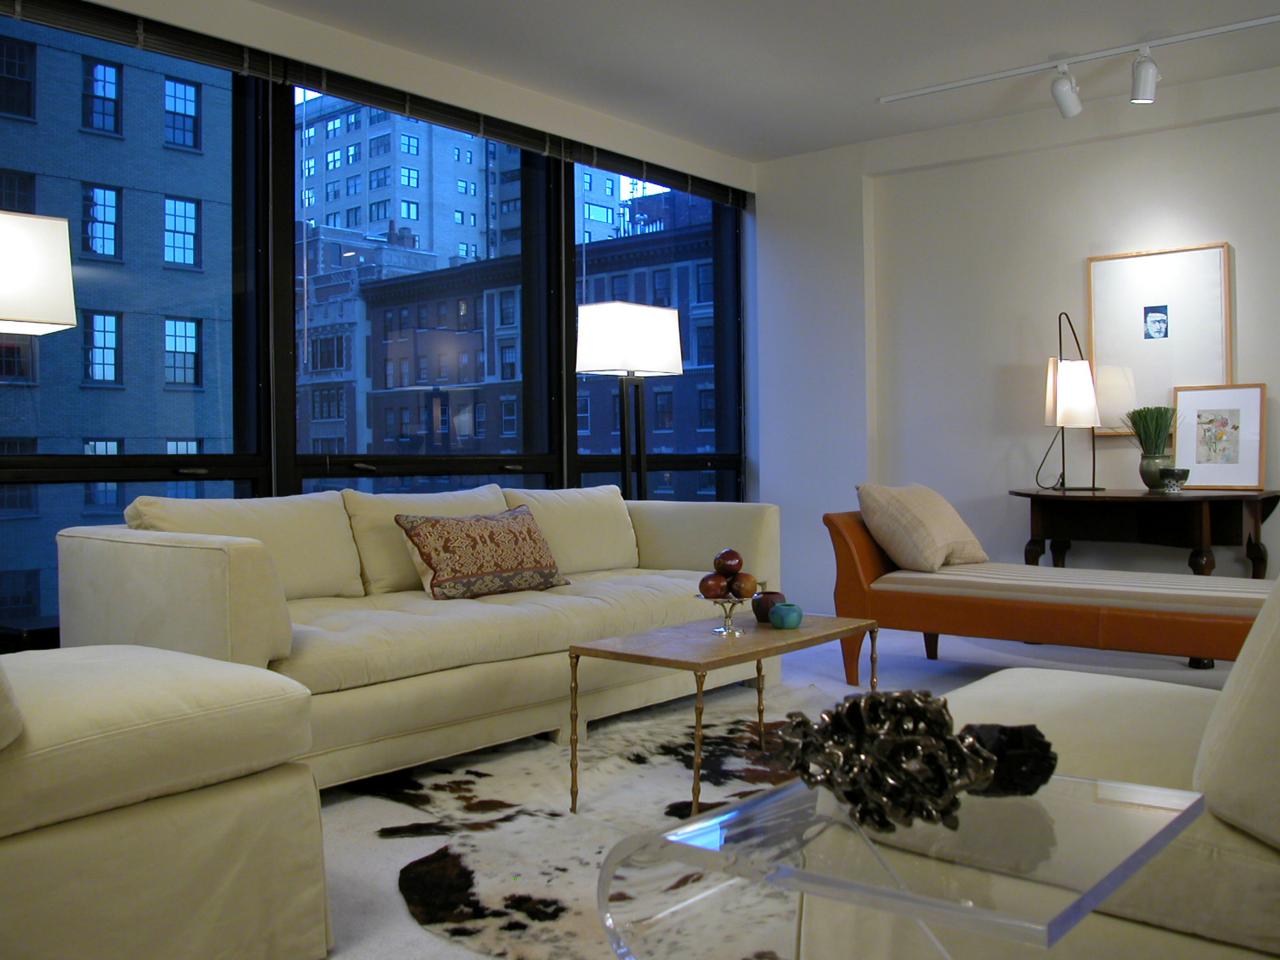 Living Room Lighting Tips Hgtv with Living Room Lighting Pictures